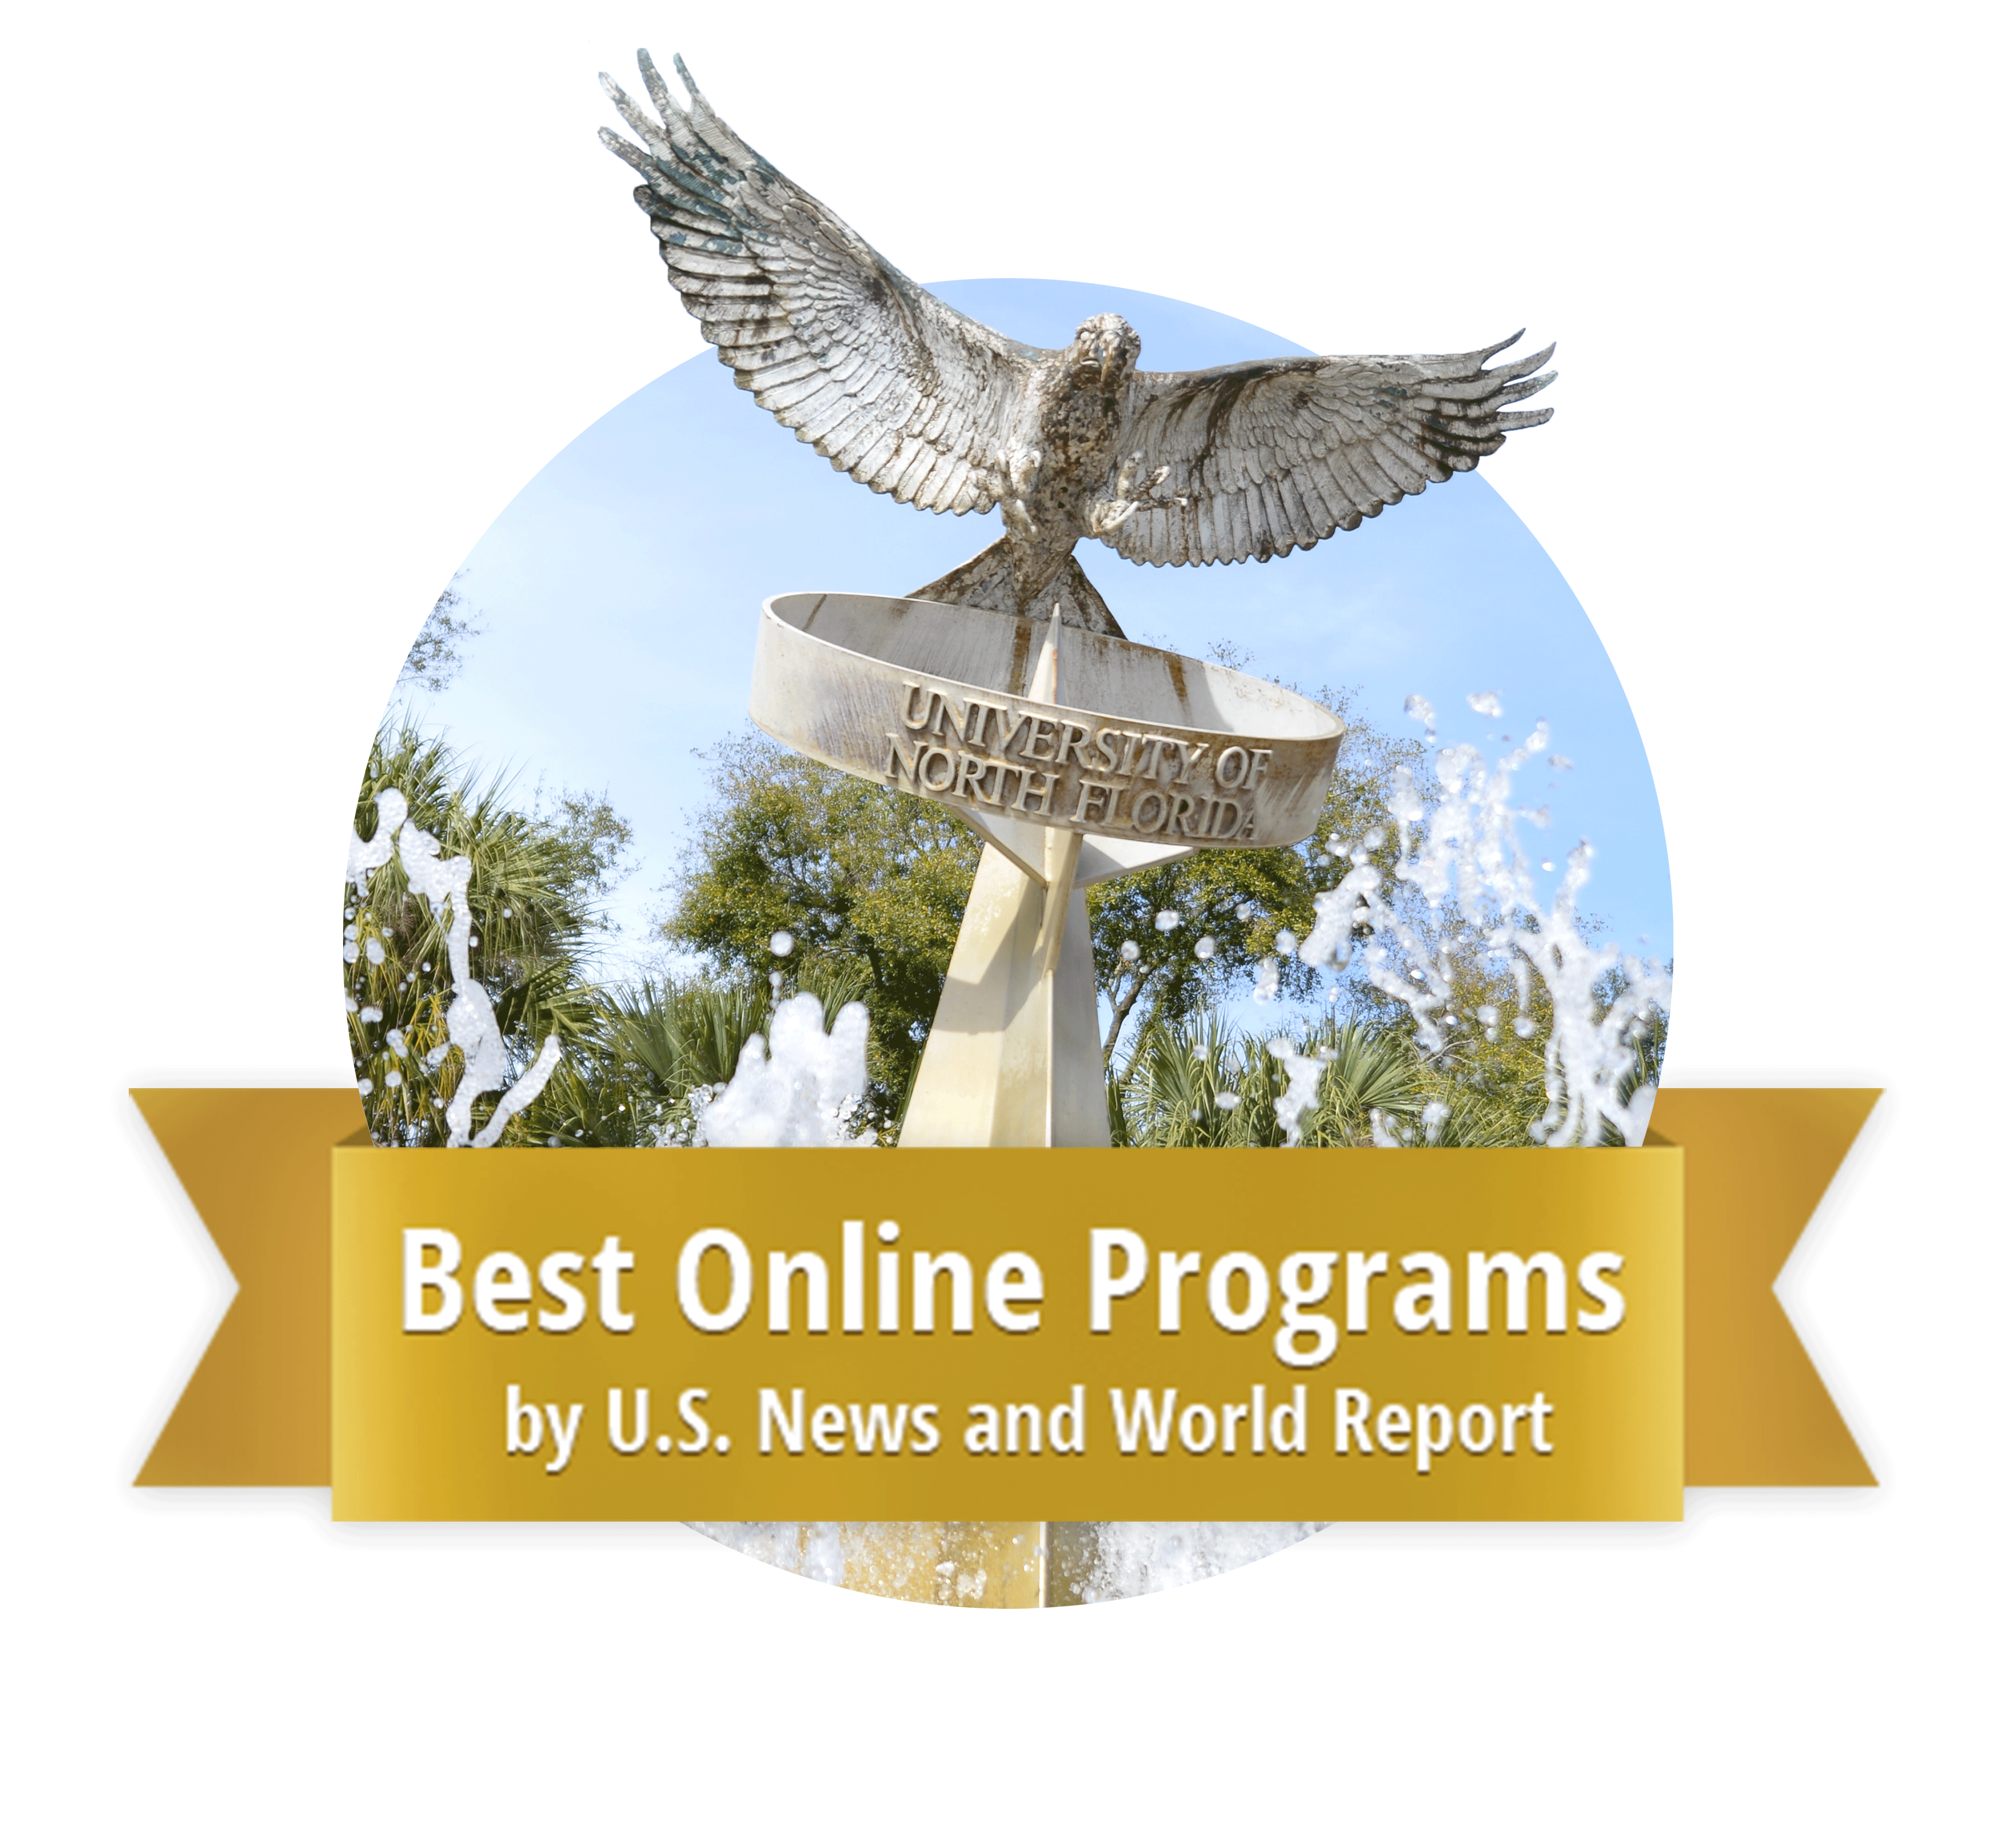 UNF Osprey Statue and Best Online Programs by U.S. NEWS and World Report